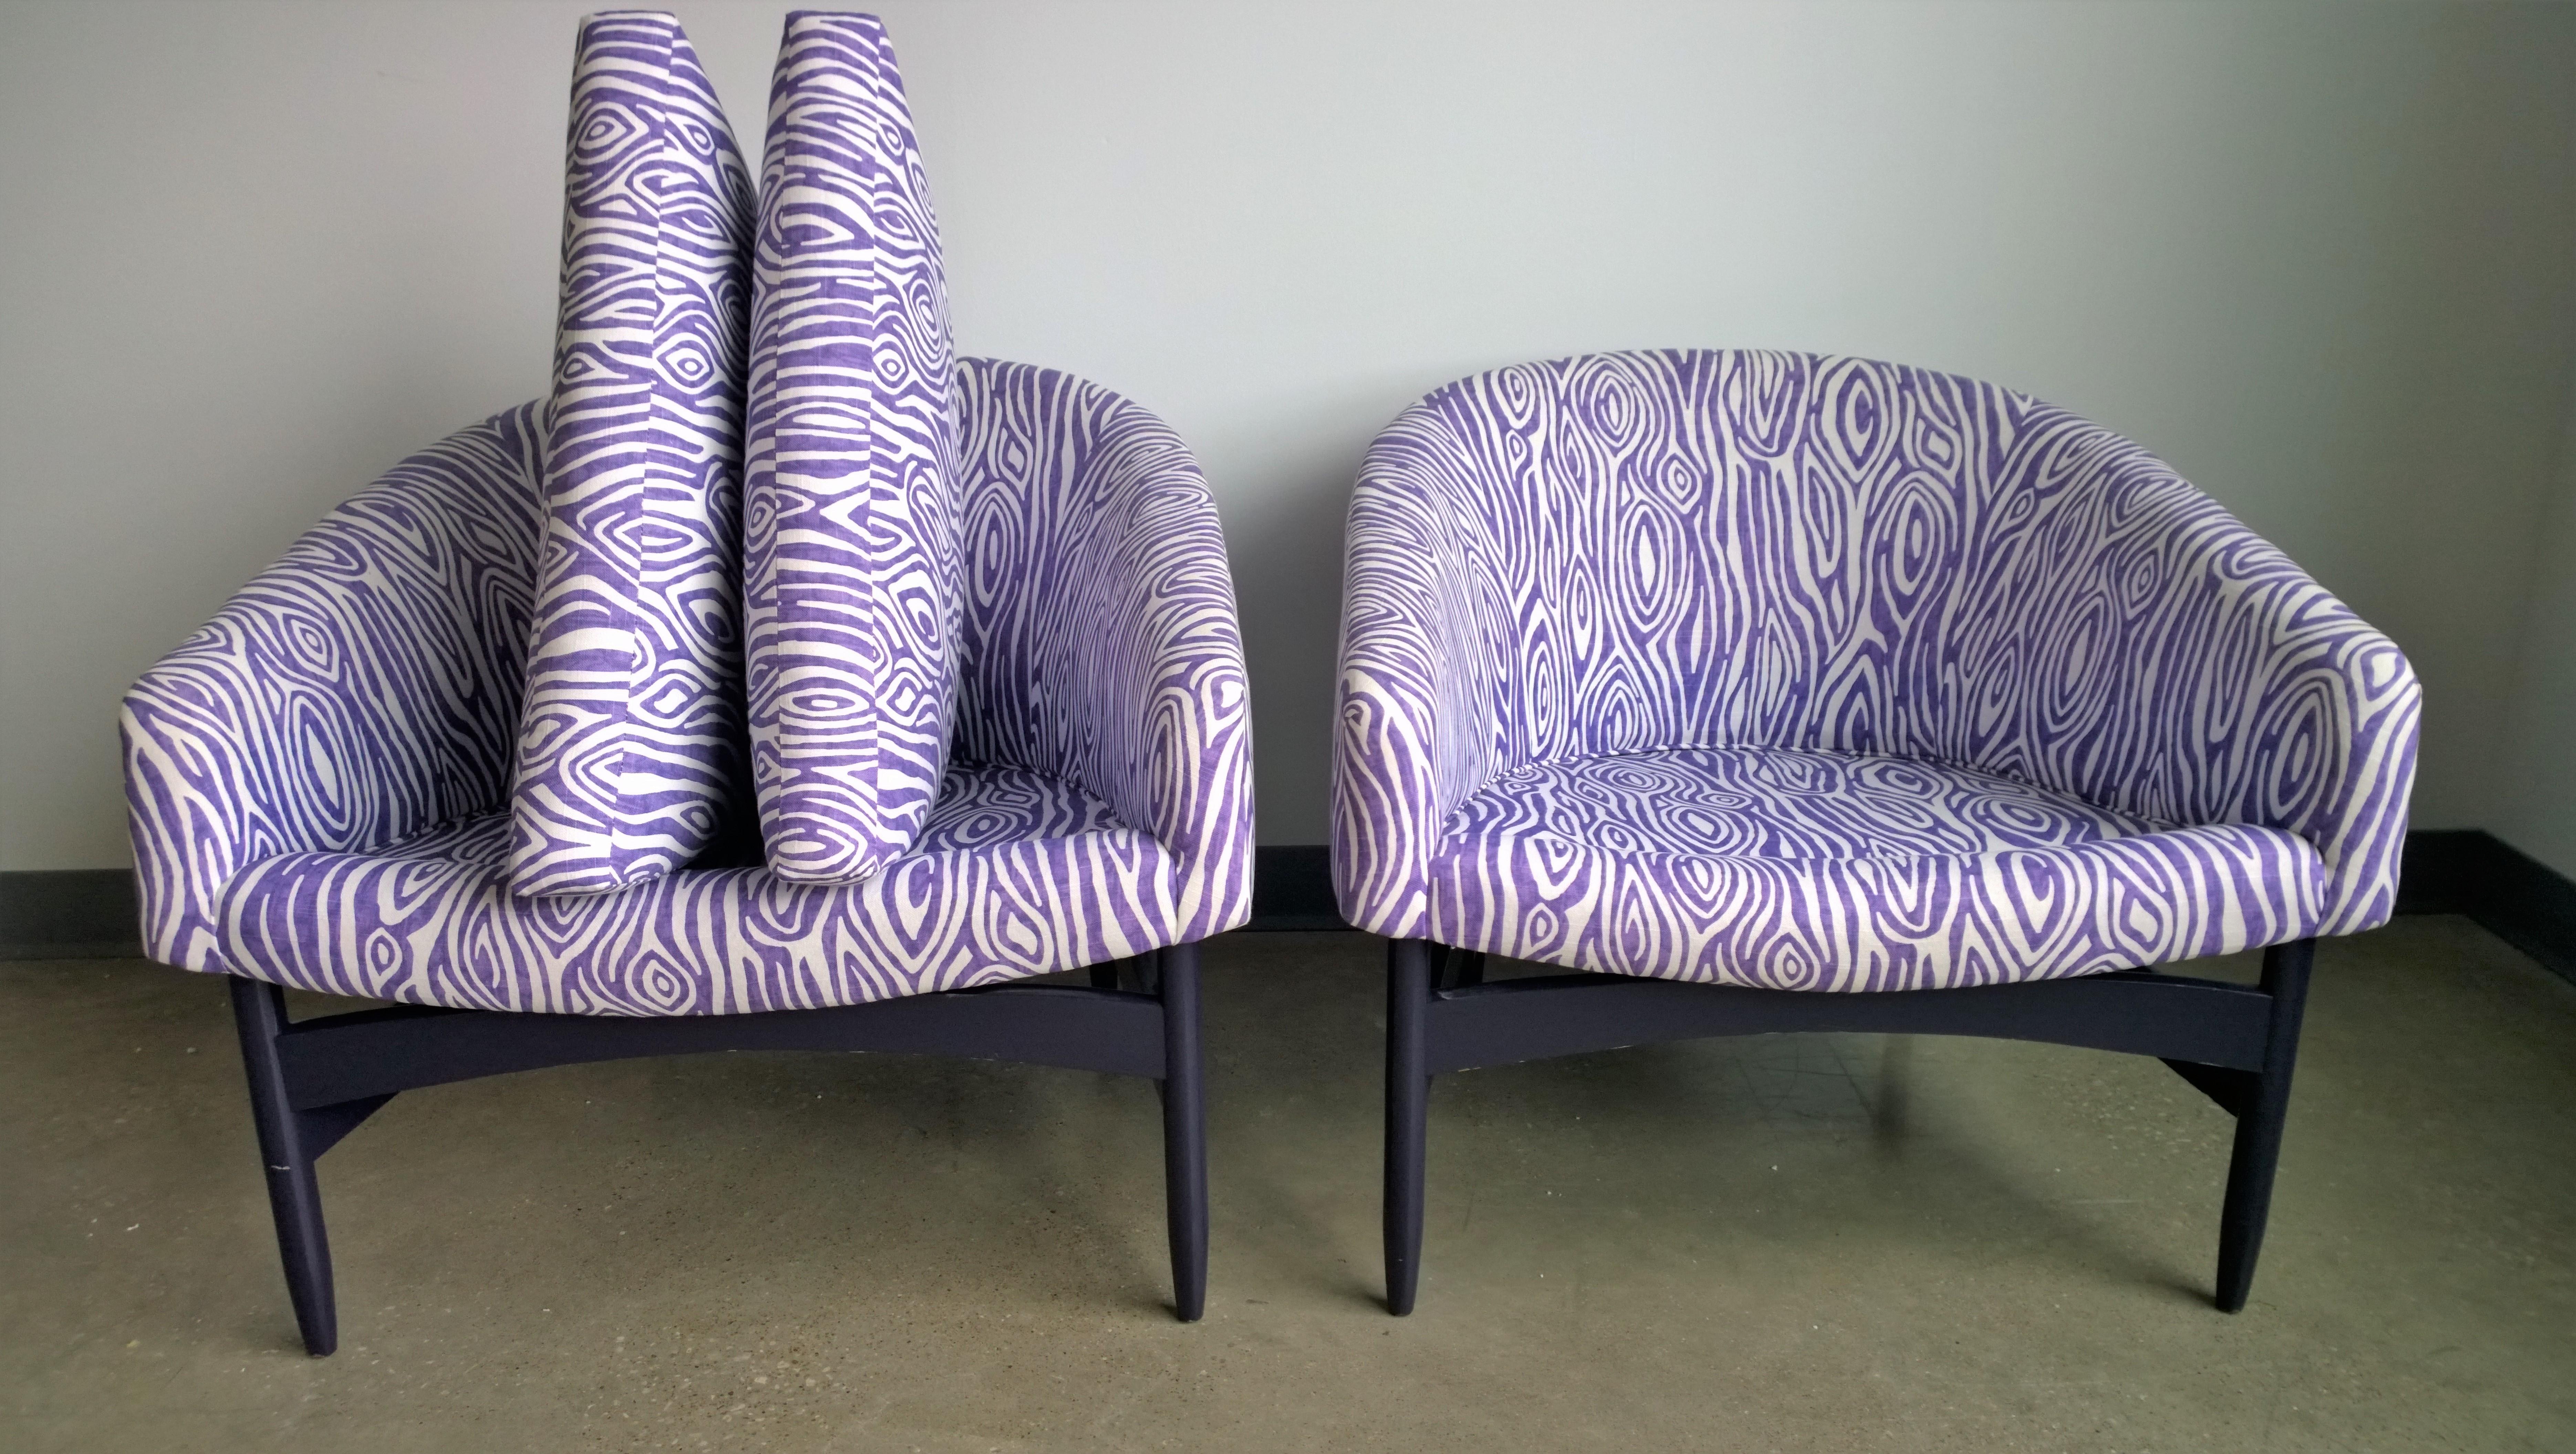 Pair of Newly Upholstered Purple & White Animal Print Barrel Back Lounge Chairs For Sale 10